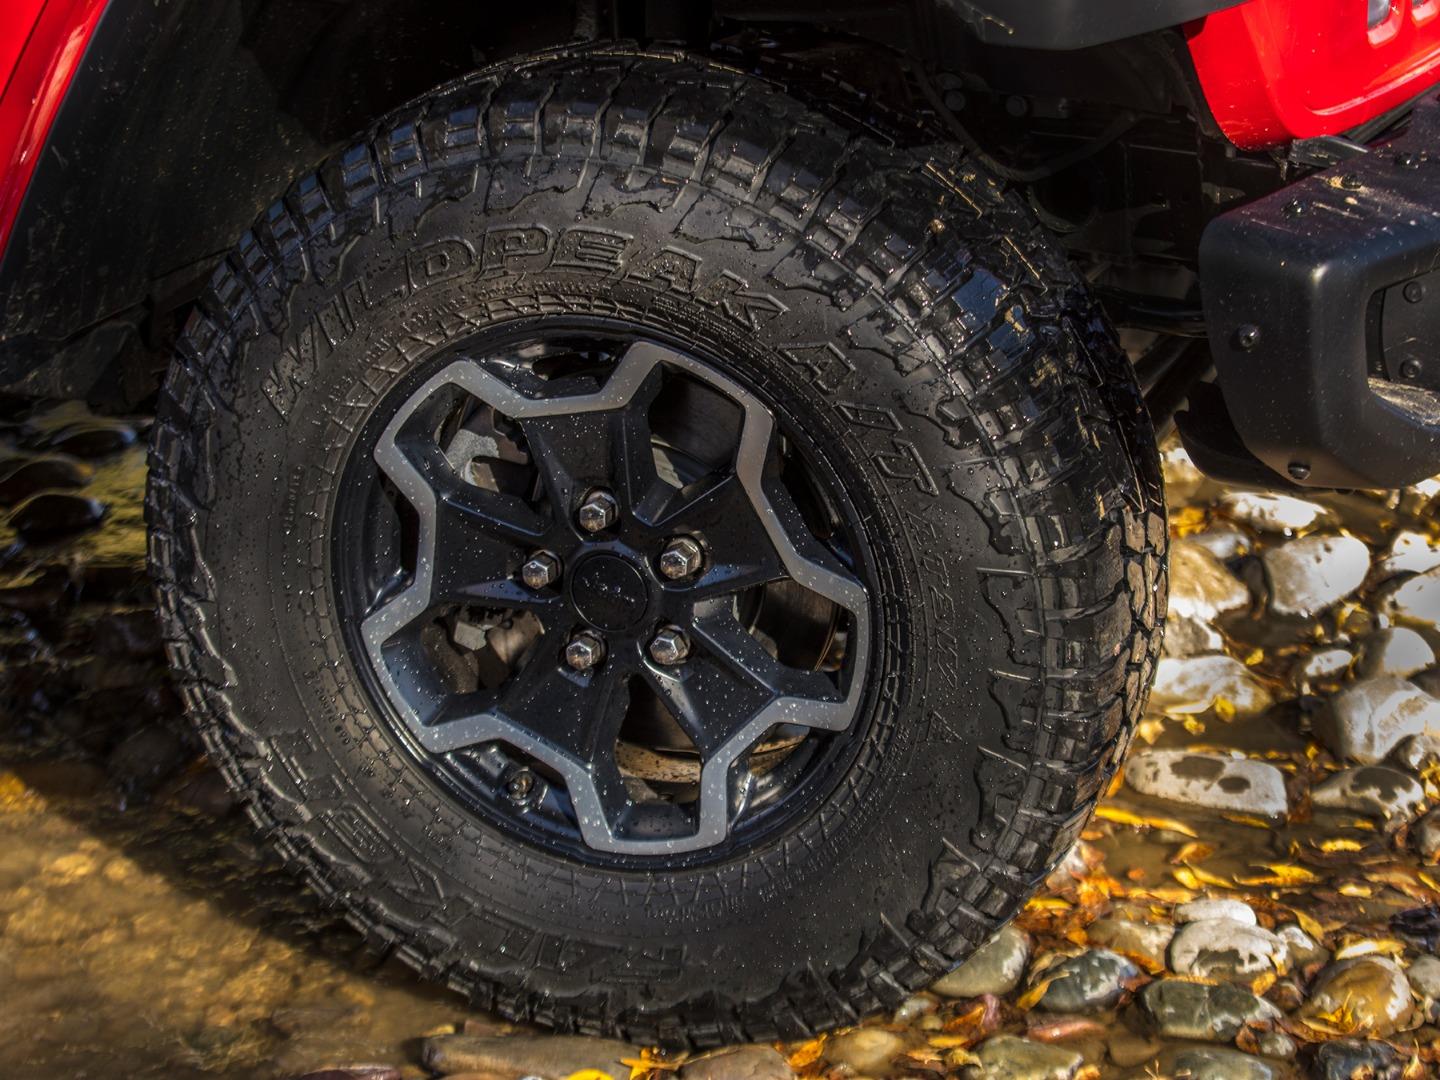 5 extras you should fit on a new jeep gladiator